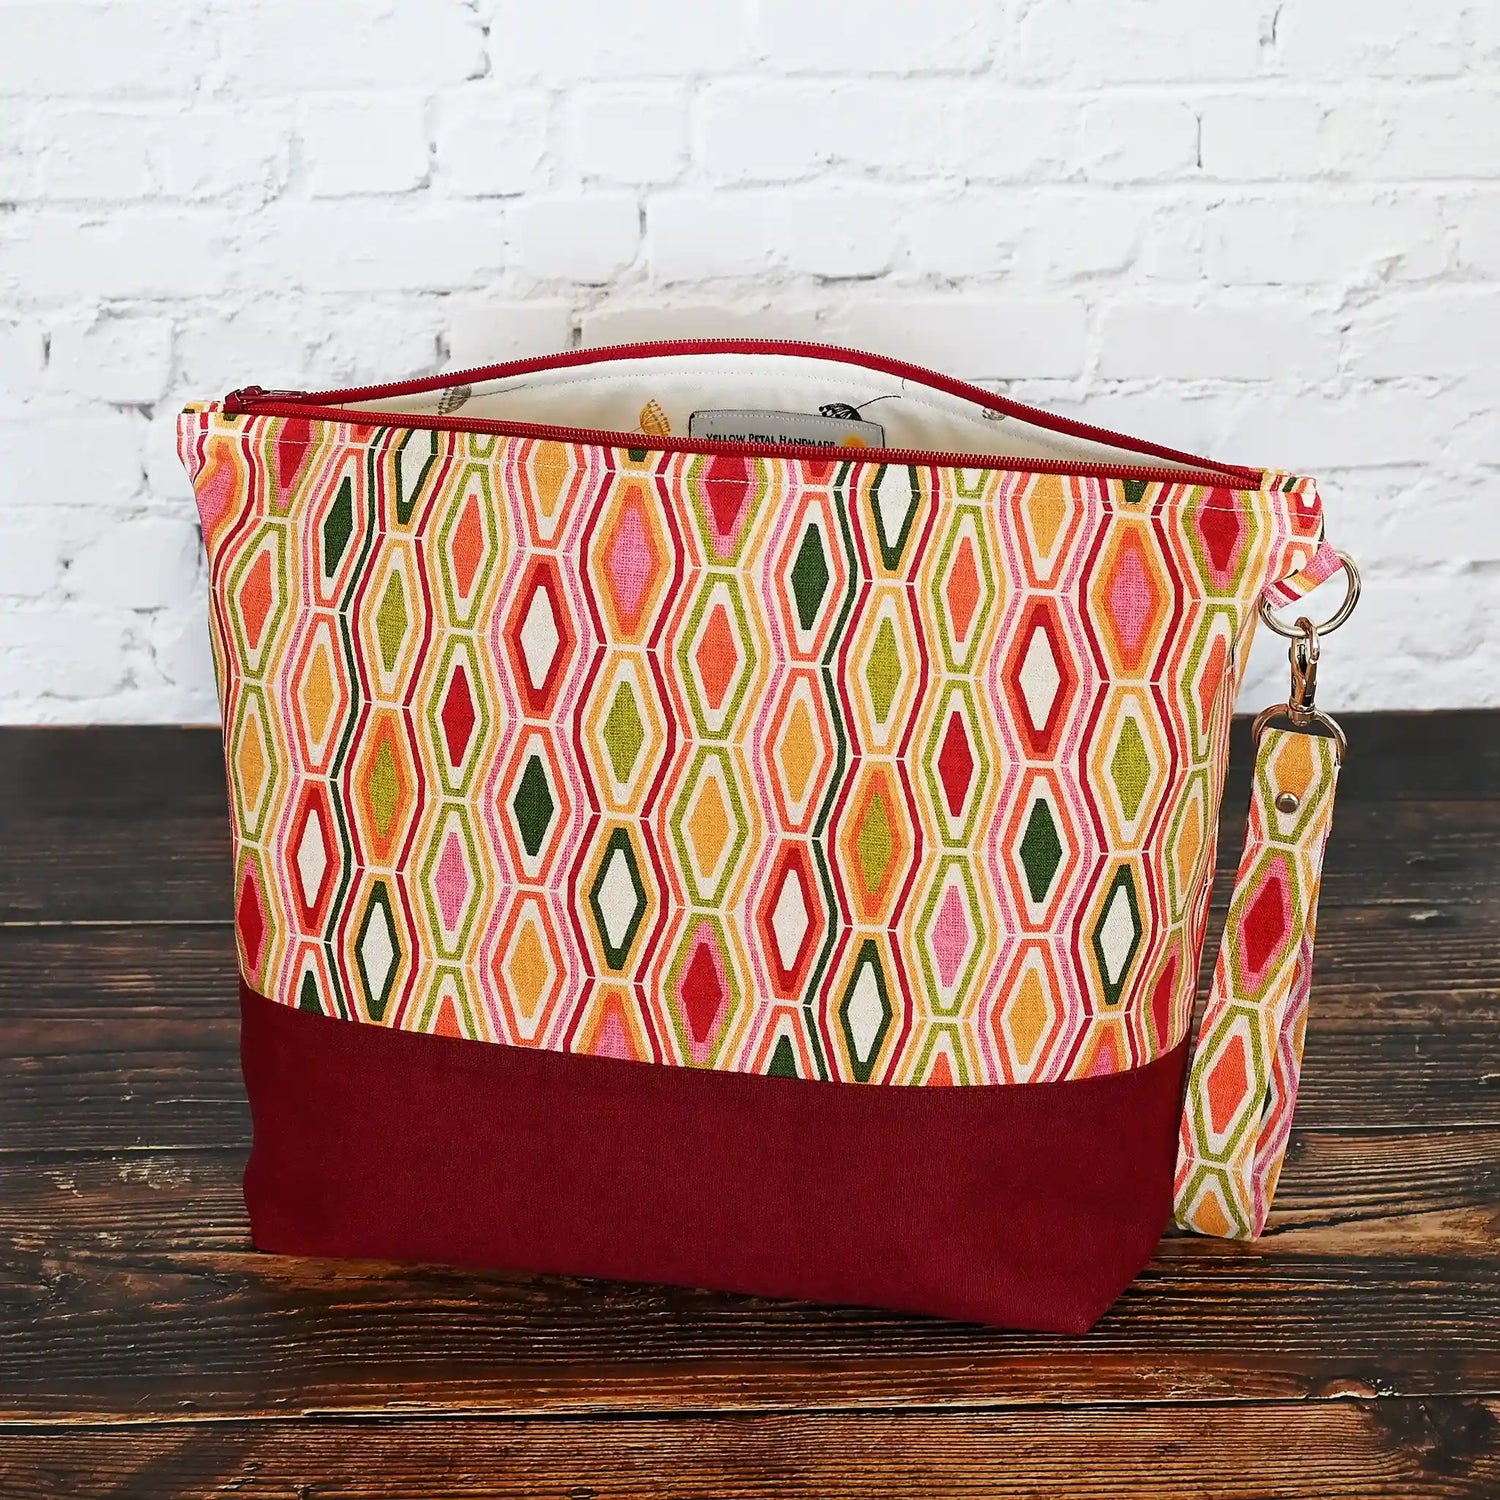 Gorgeous Jewel toned project bag with wrist strap and pockets.  Made in Canada by Yellow Petal Handmade.